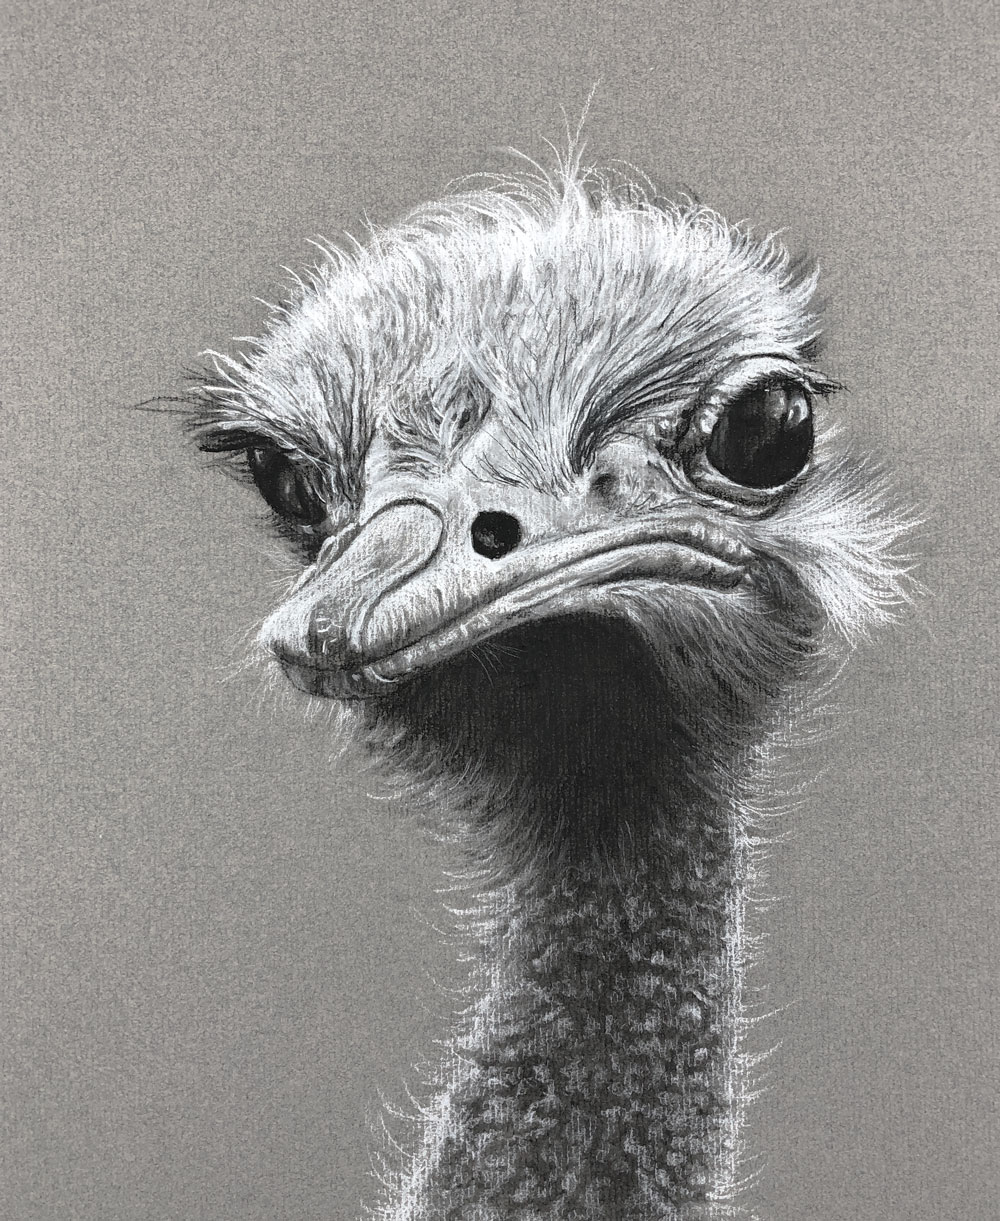 Charcoal drawing of an ostrich